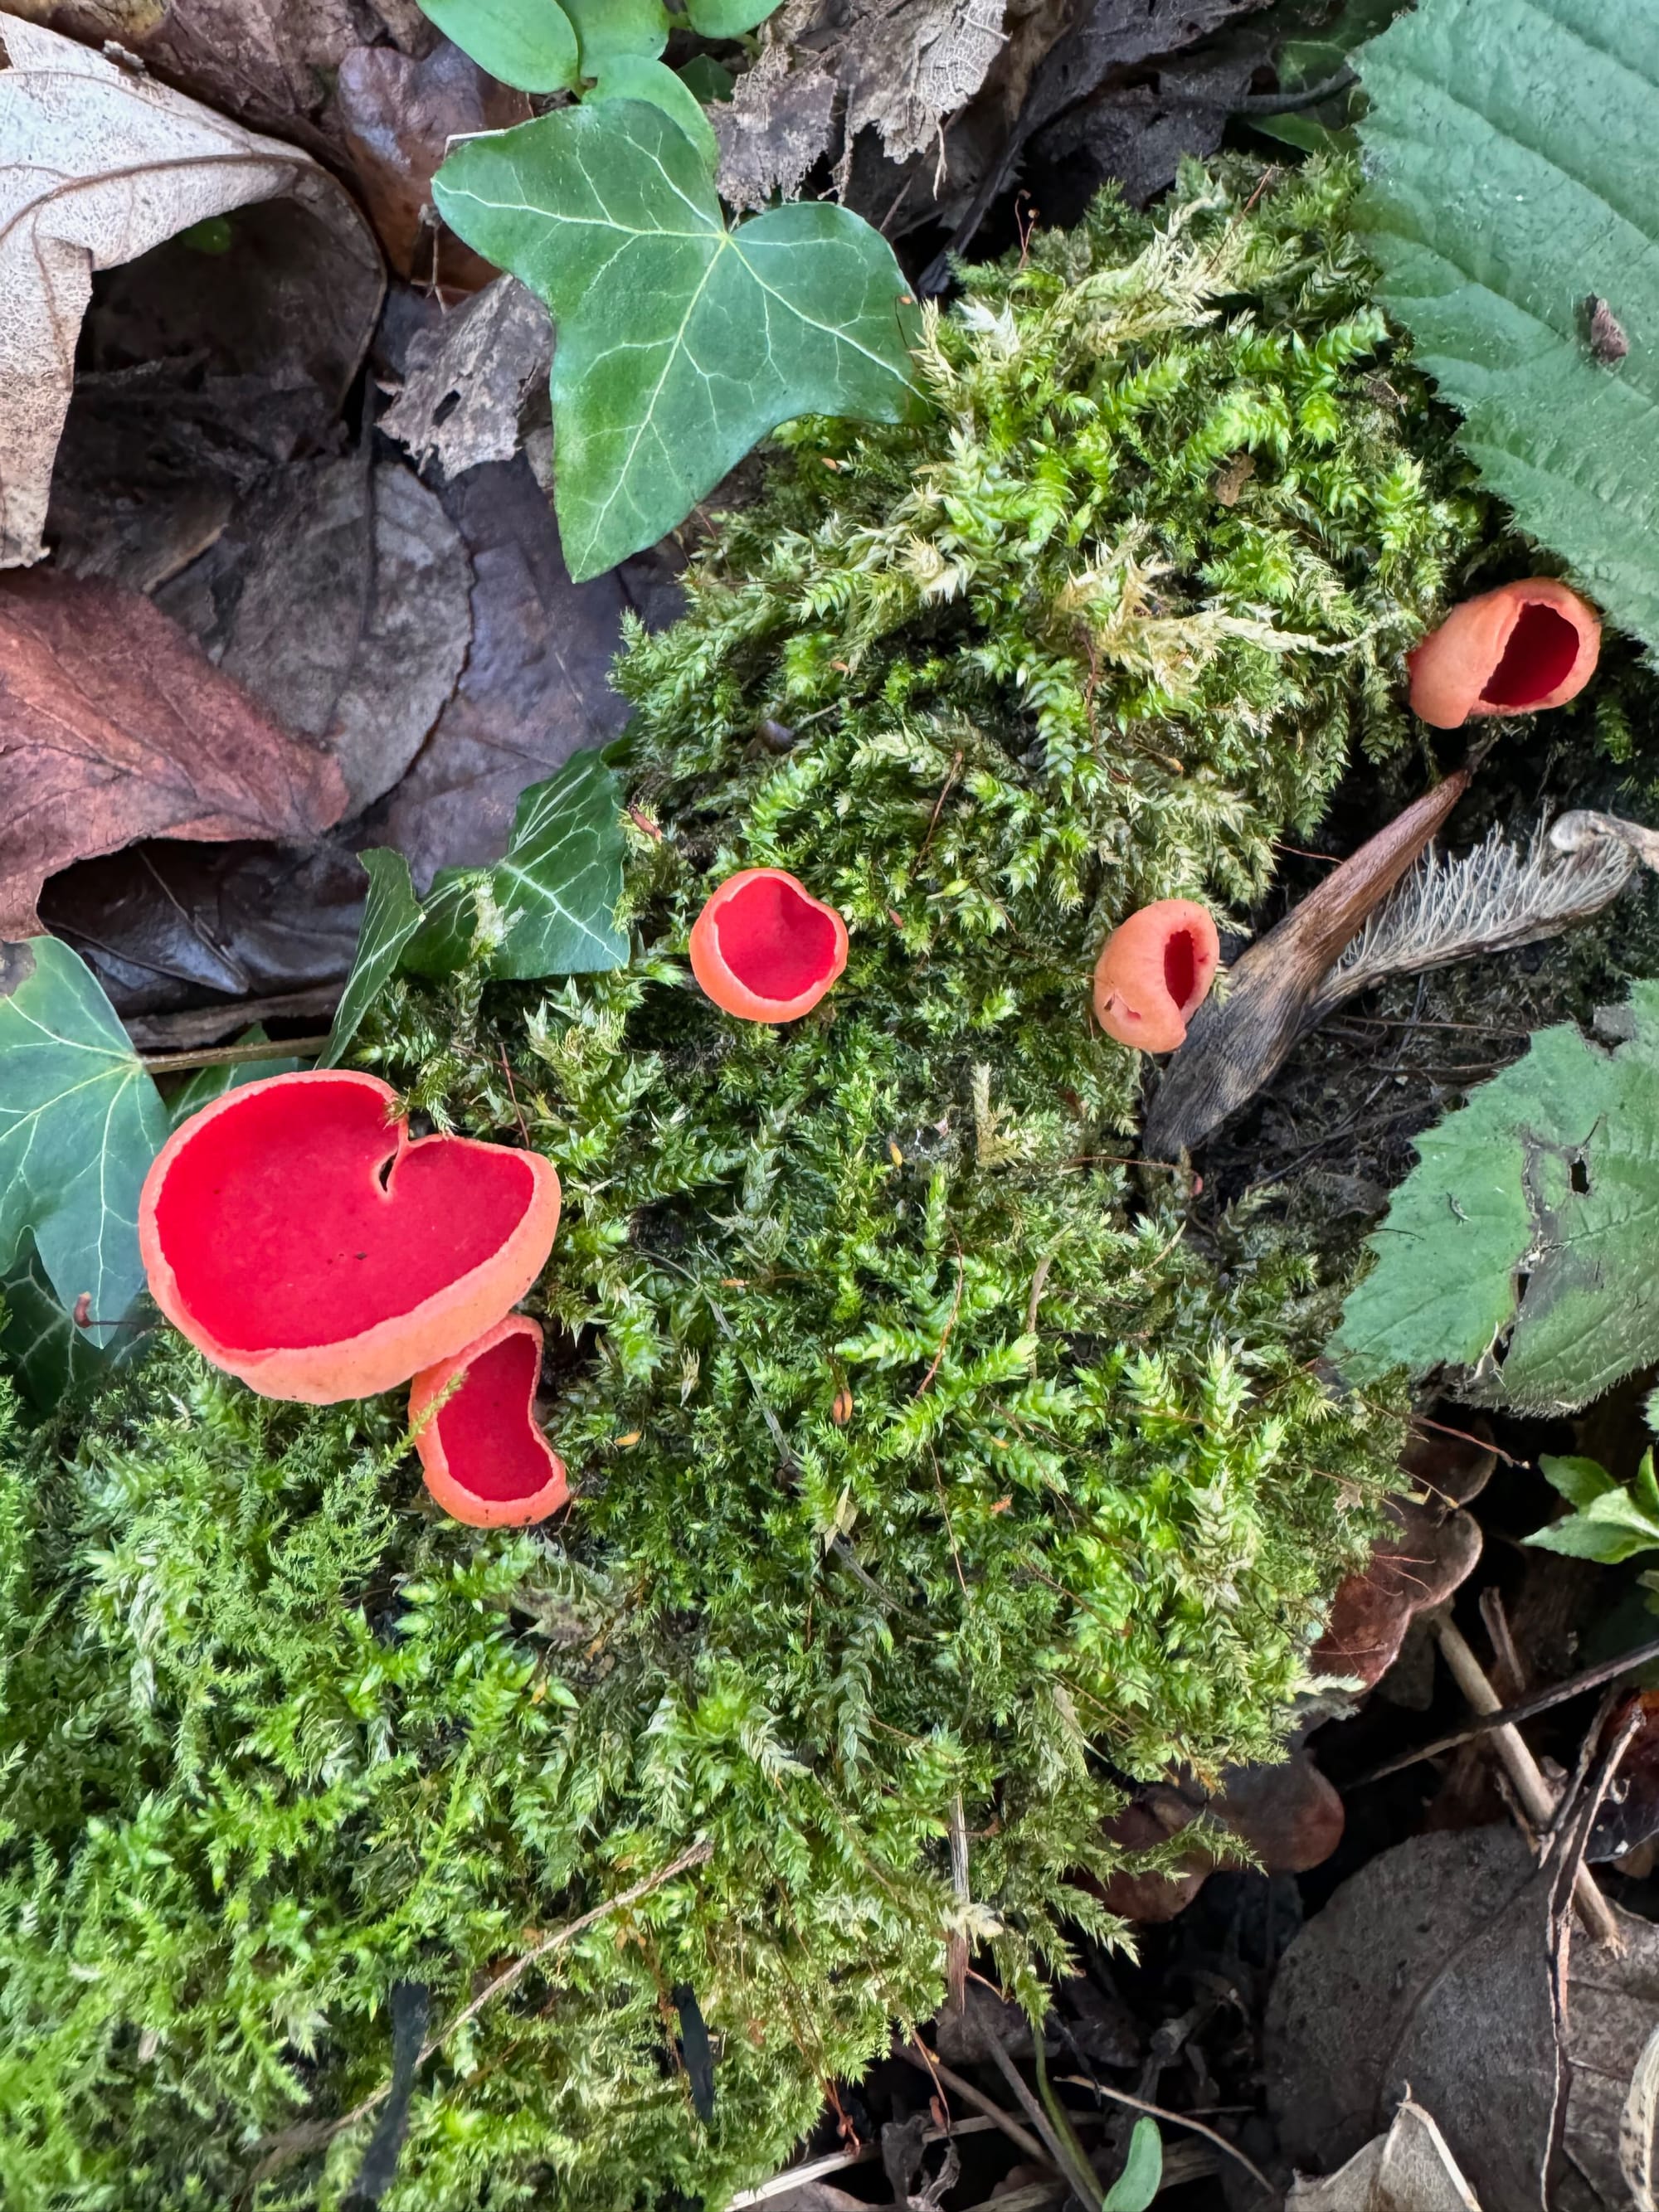 Small, red, cup shaped mushrooms with a bright rep top and lighter red underside. Growing out of a moss covered log.